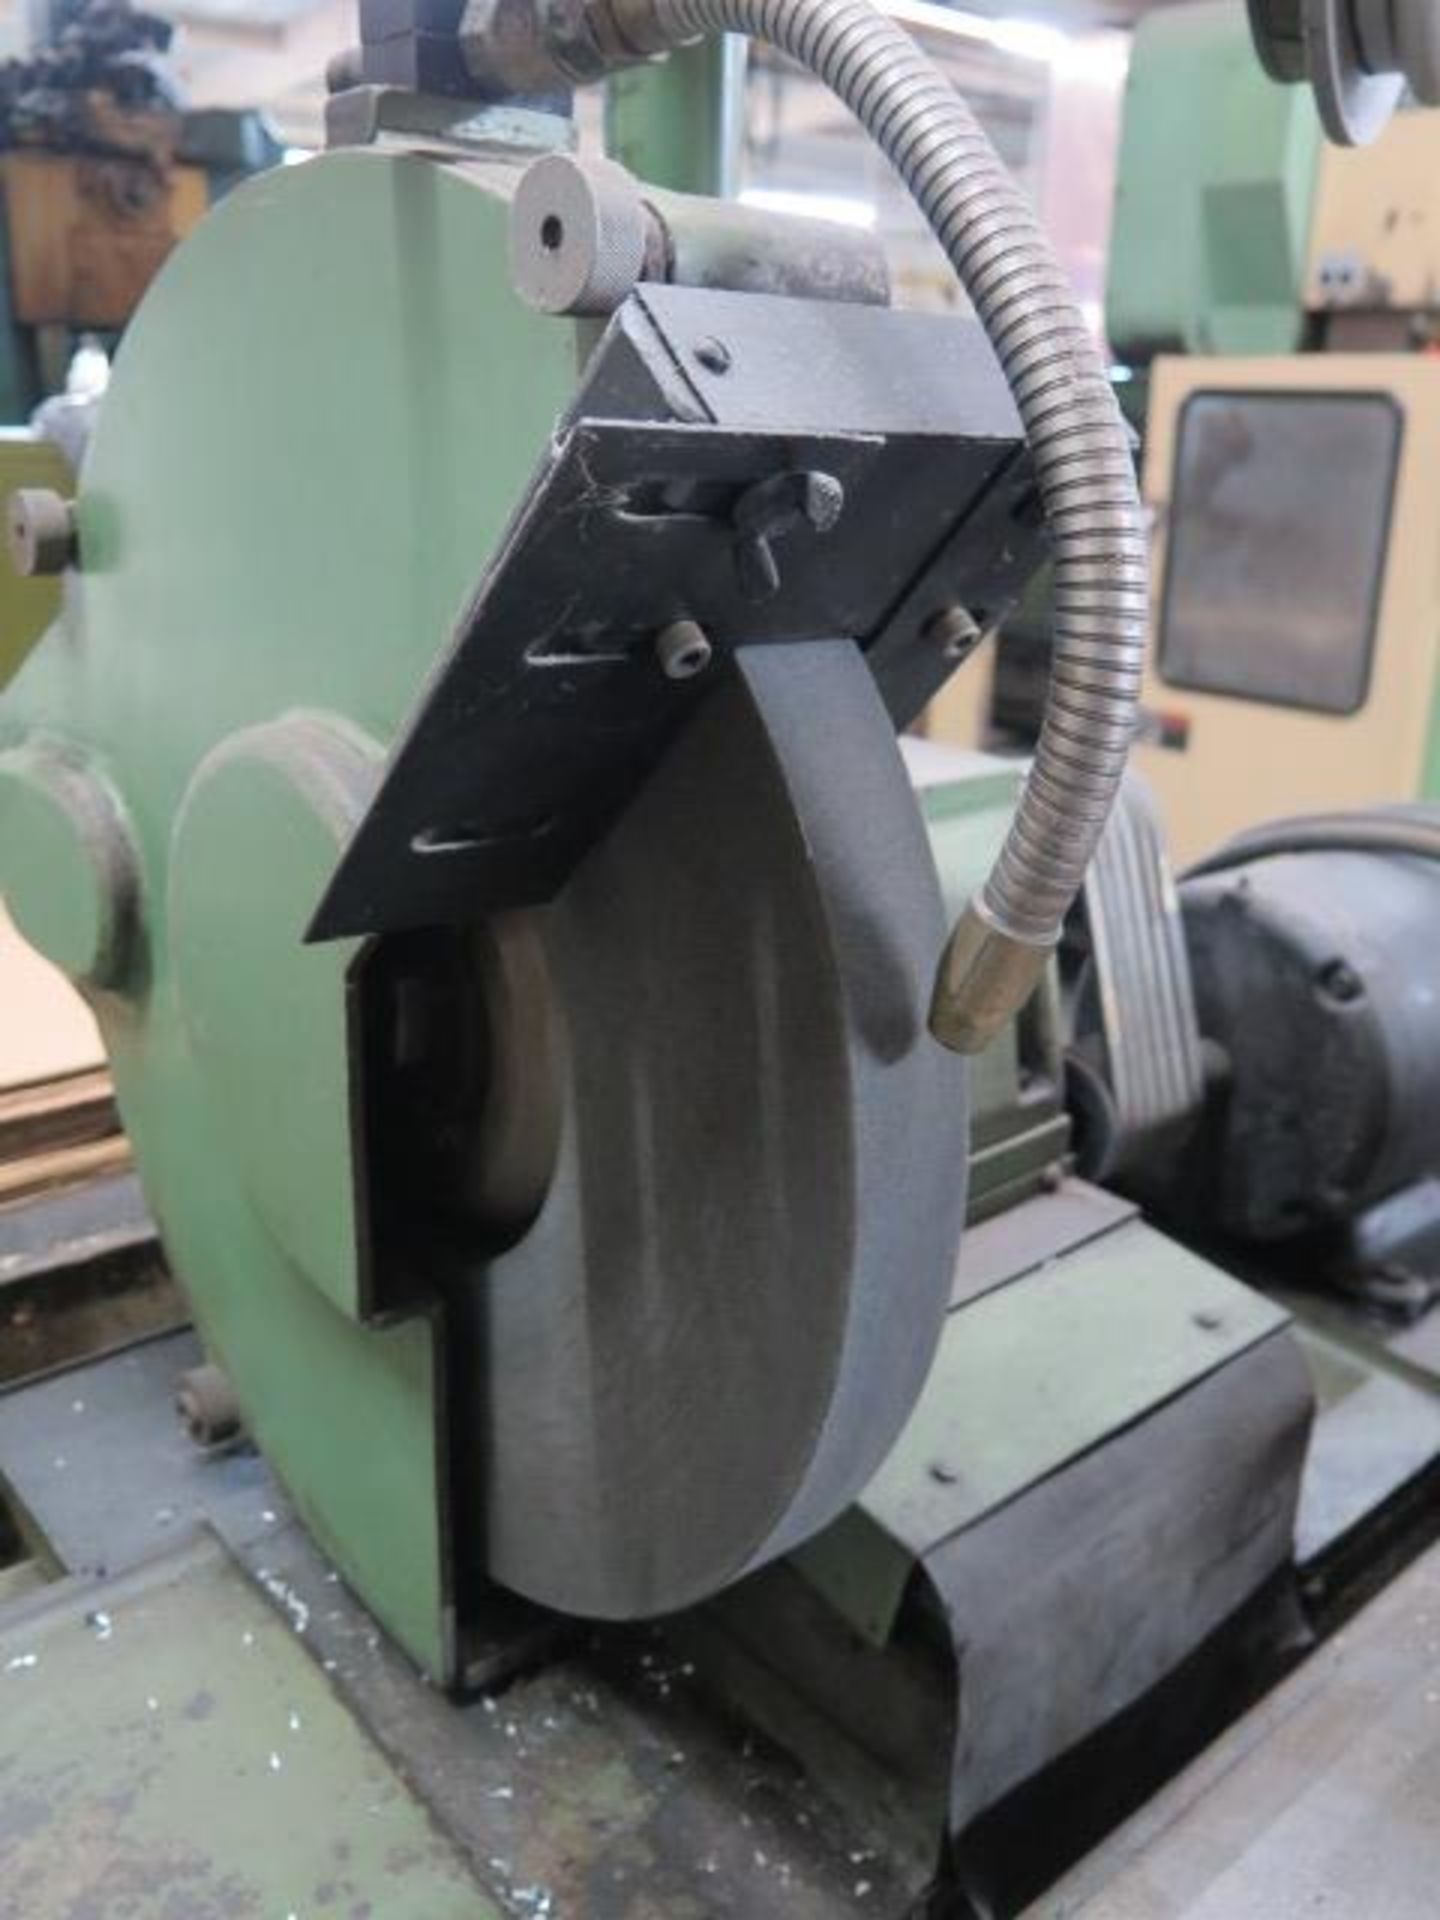 Storm Vulcan mdl. 15 Cam Shaft Grinder s/n 800-76 w/ Motorized Work Head, Tailstock, SOLD AS IS - Image 10 of 16